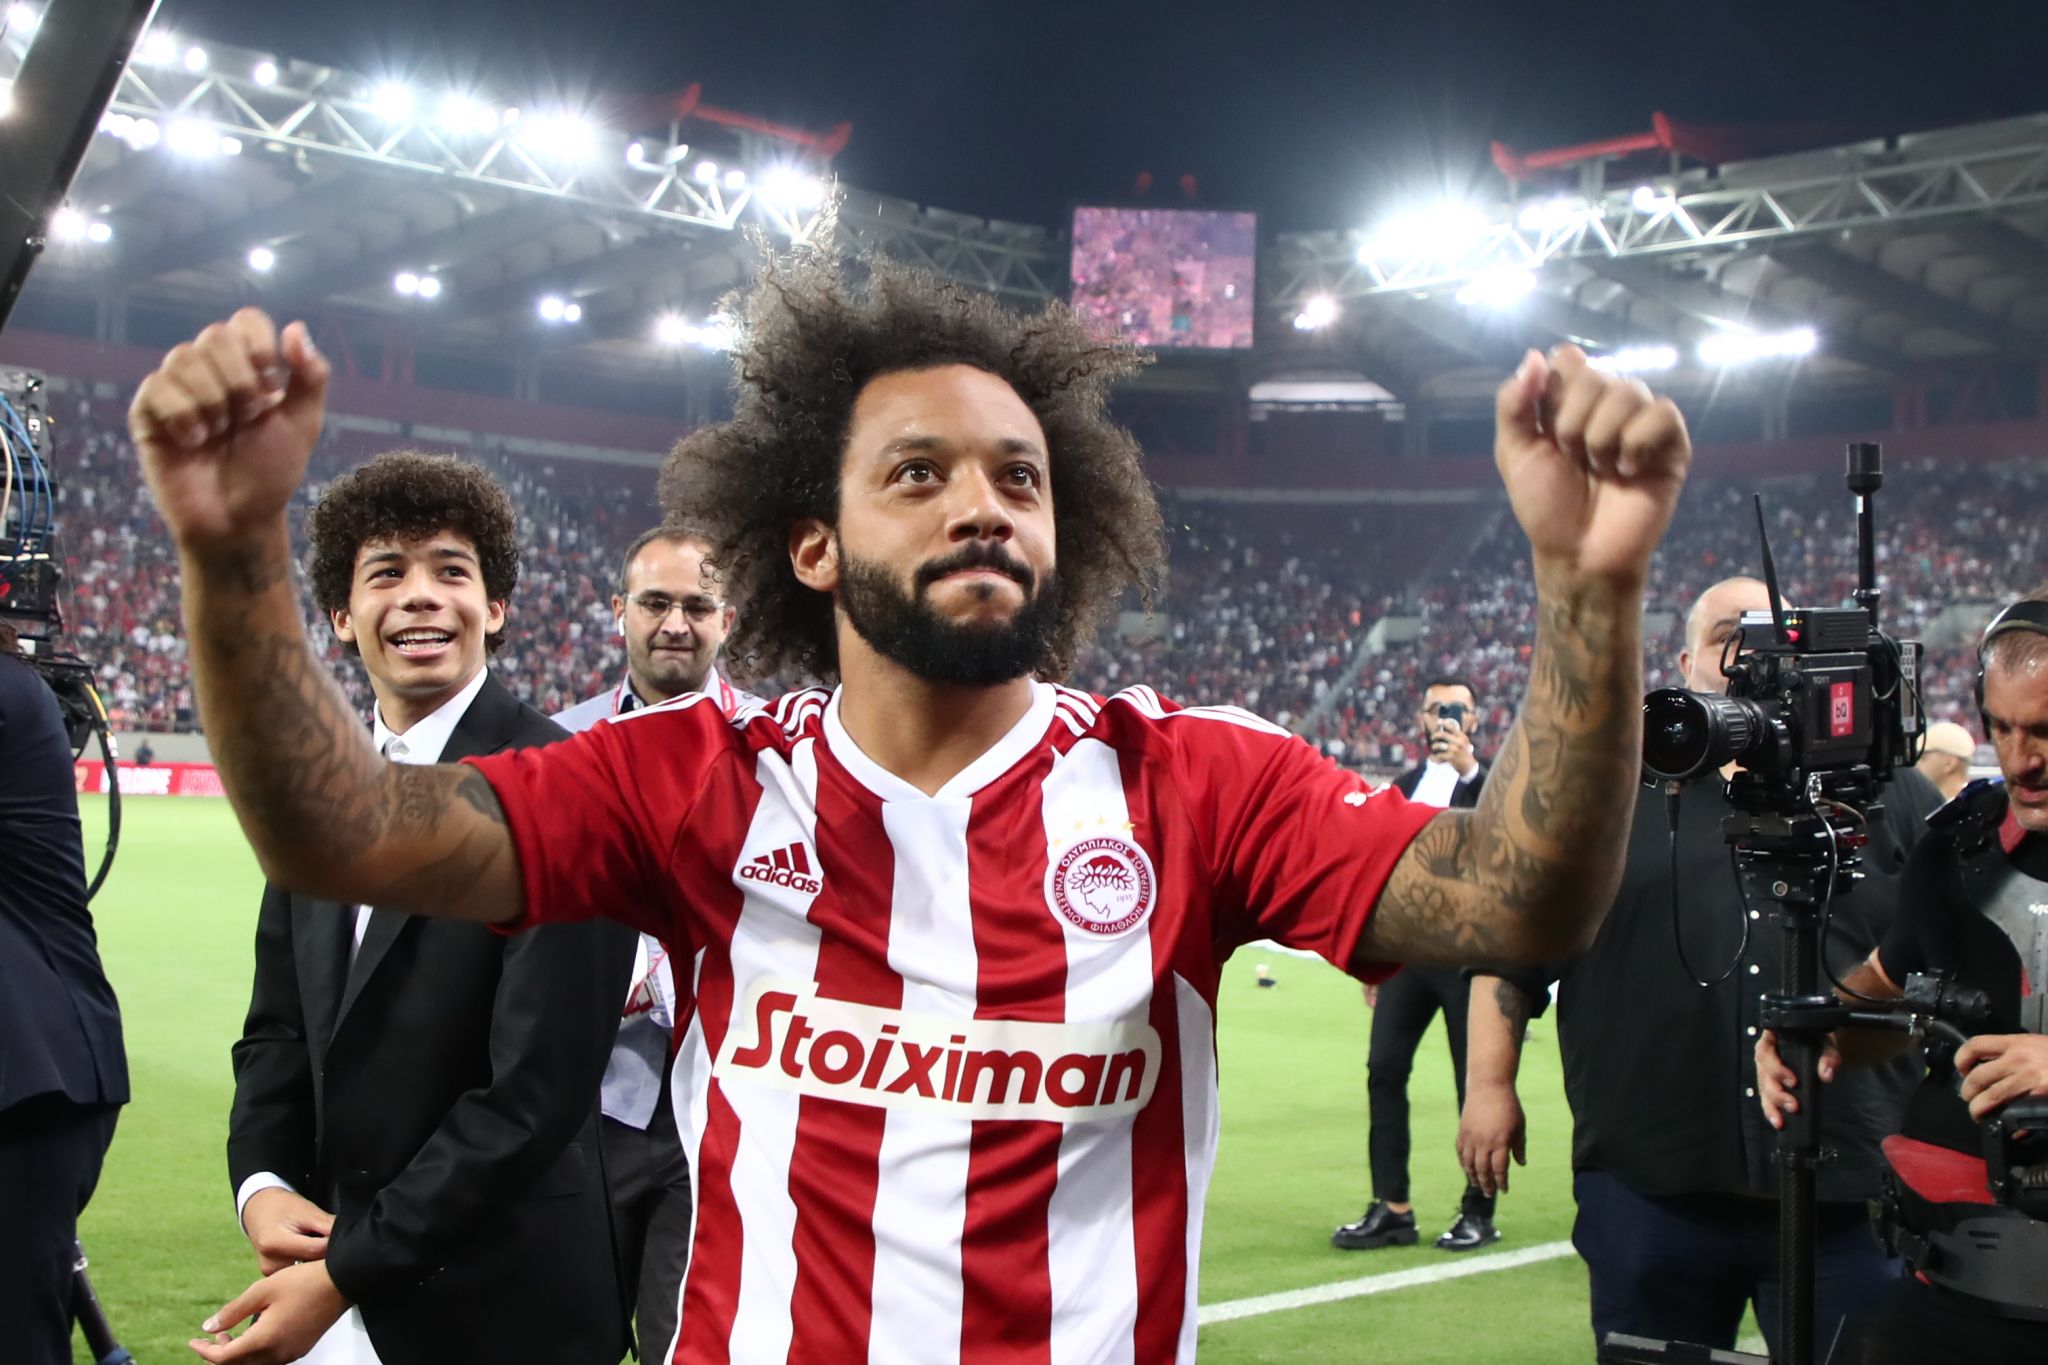 Marcelo: “Thank you all, 'pame' OLYMPIACOS» - ΟΛΥΜΠΙΑΚΟΣ - Olympiacos.org